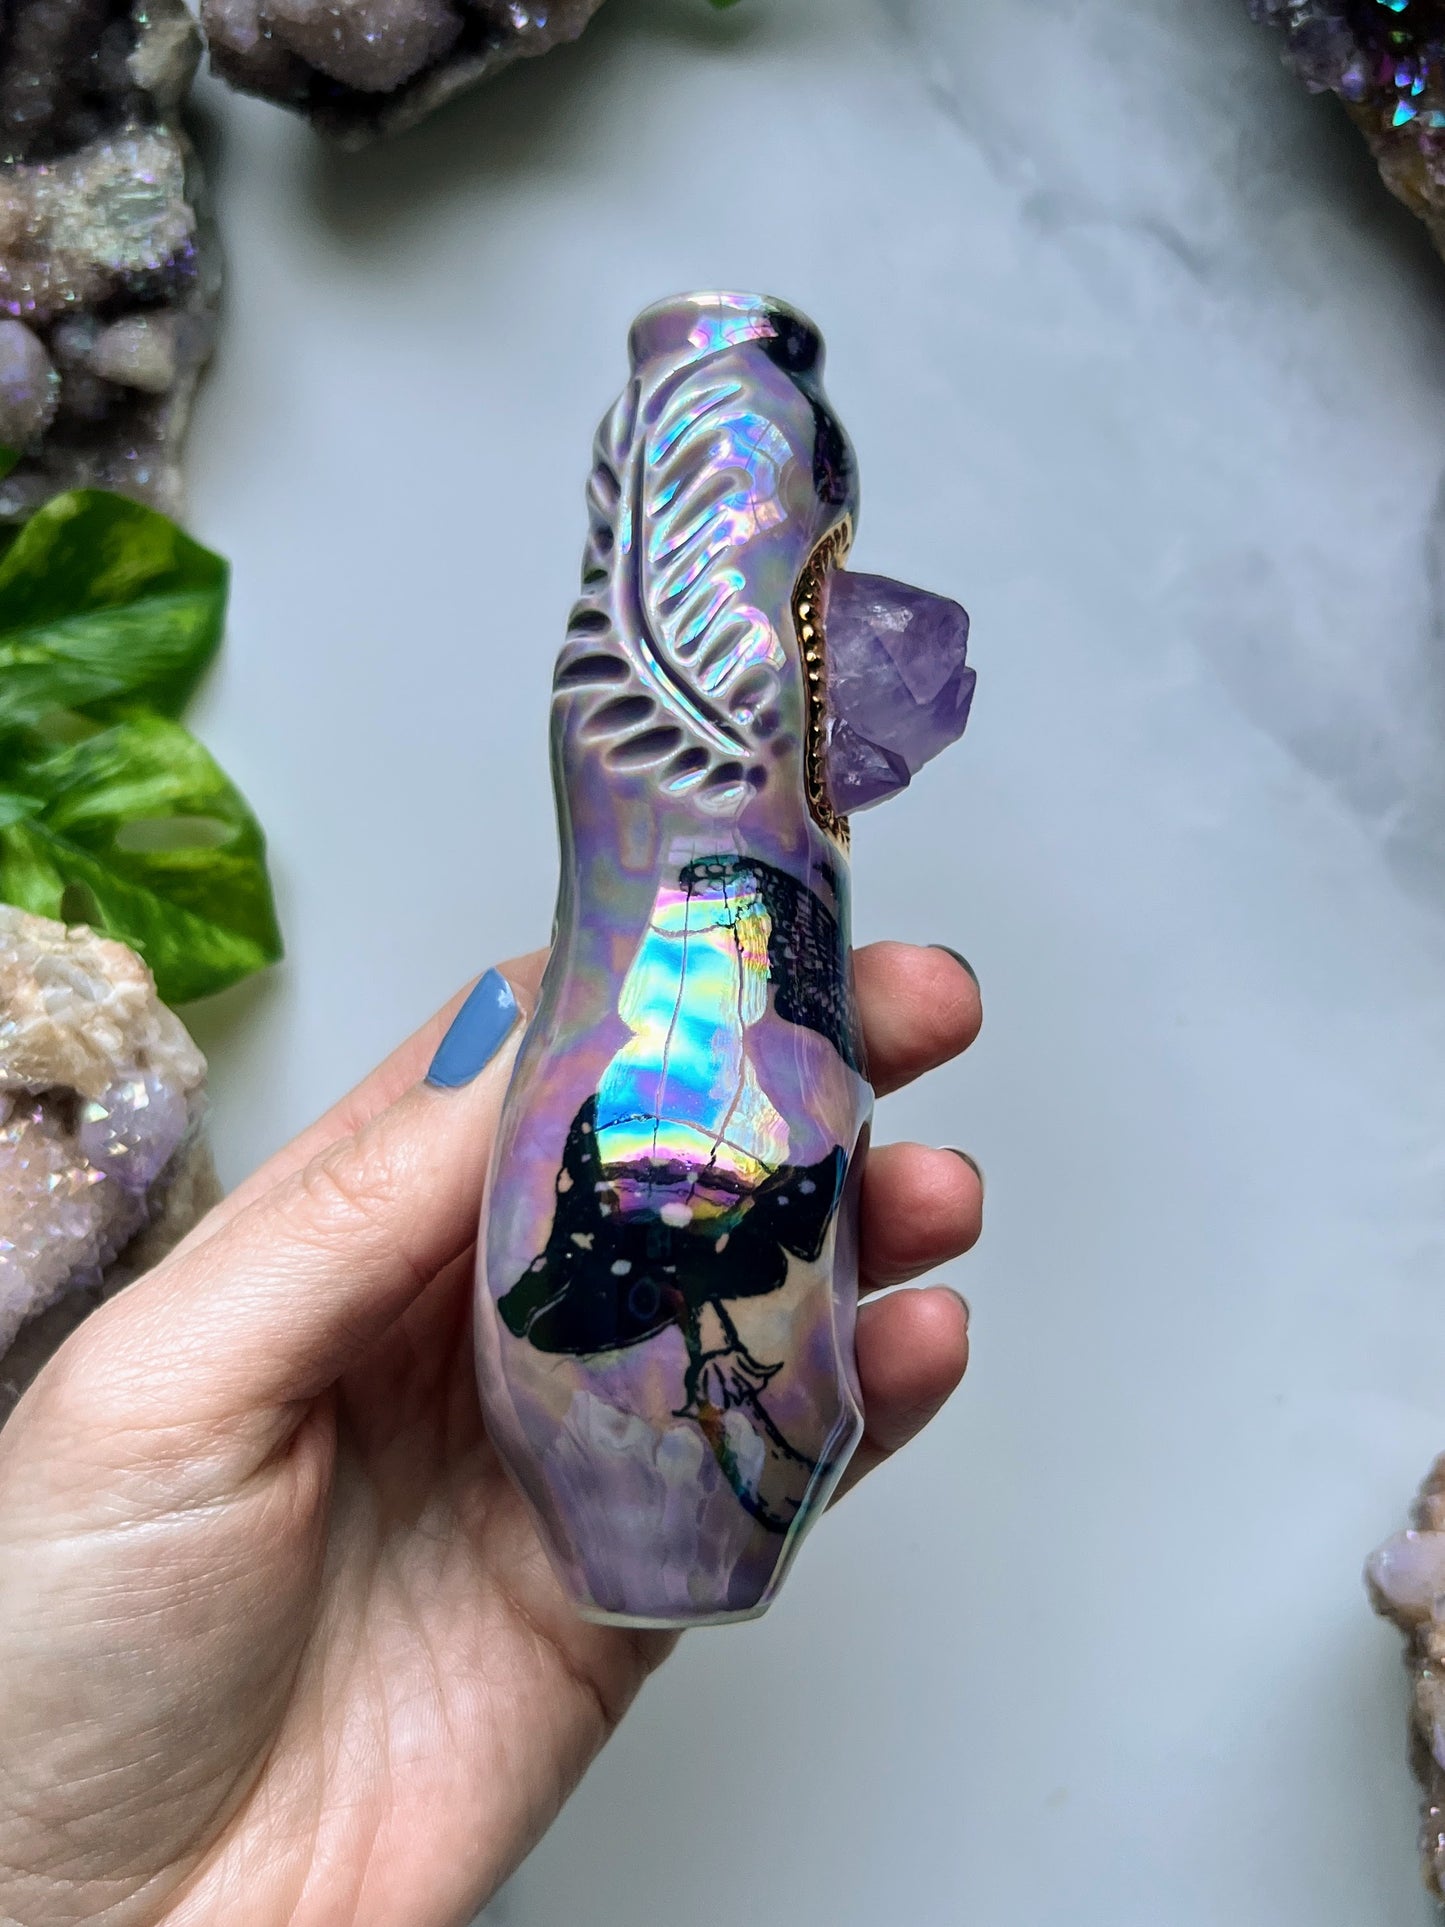 Amethyst Pipe with Deathhead Moth and Mushrooms Iridescent Porcelain Smoking Pipe